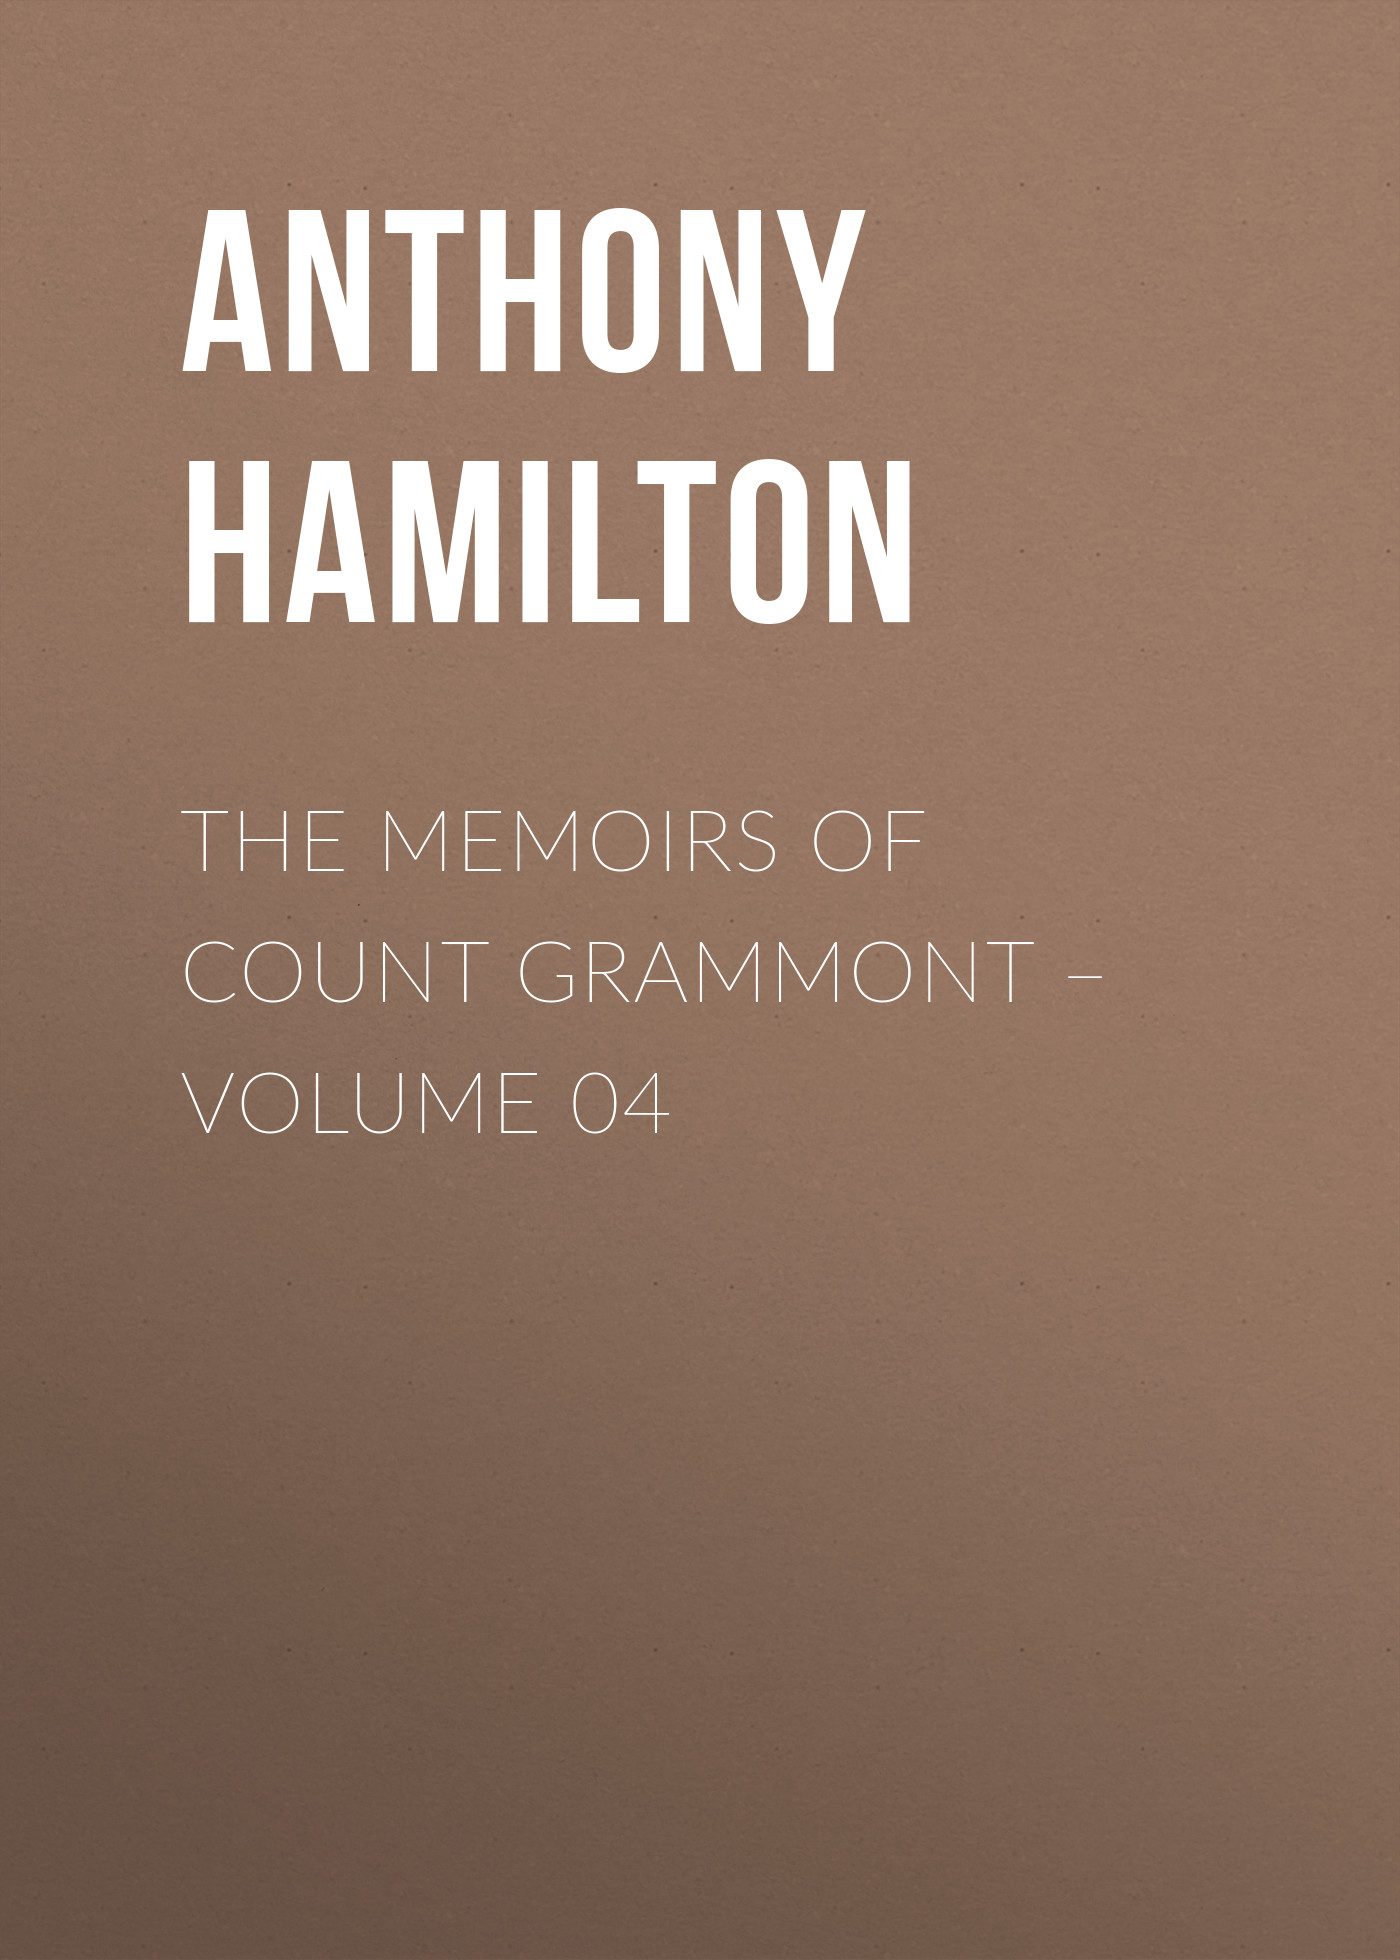 The Memoirs of Count Grammont– Volume 04